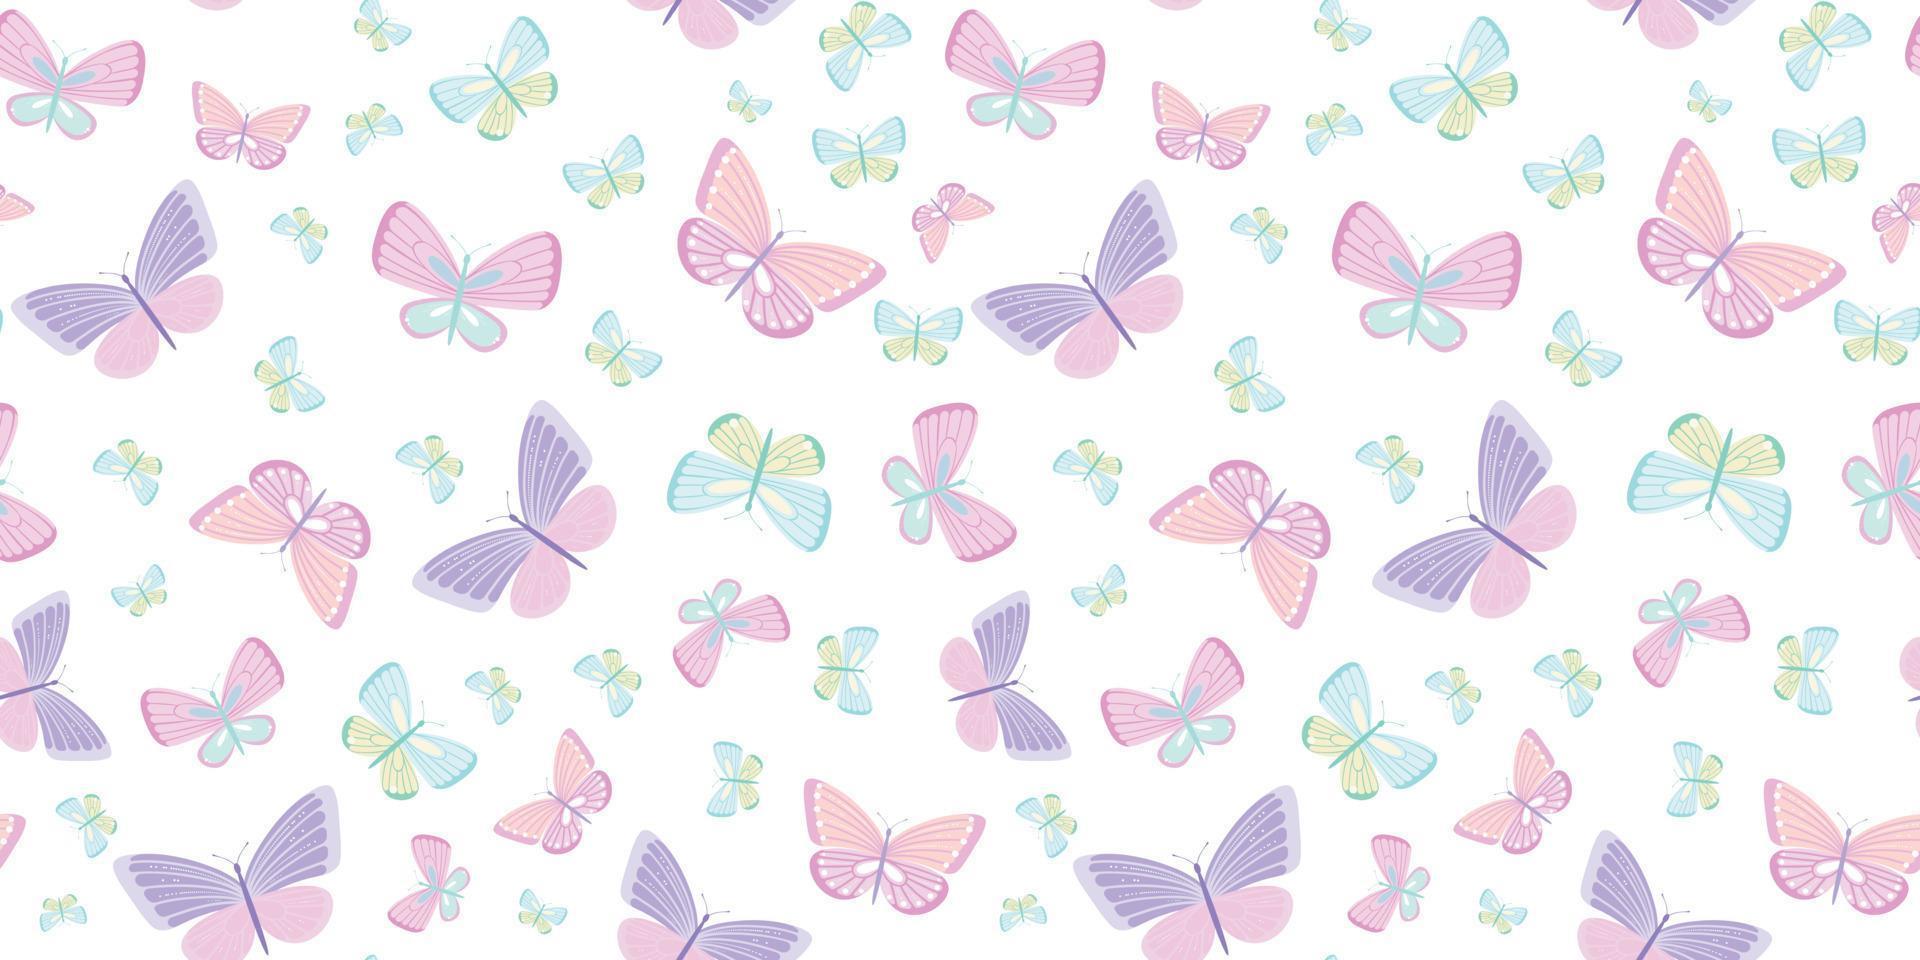 Butterfly vector pattern, repeat tile